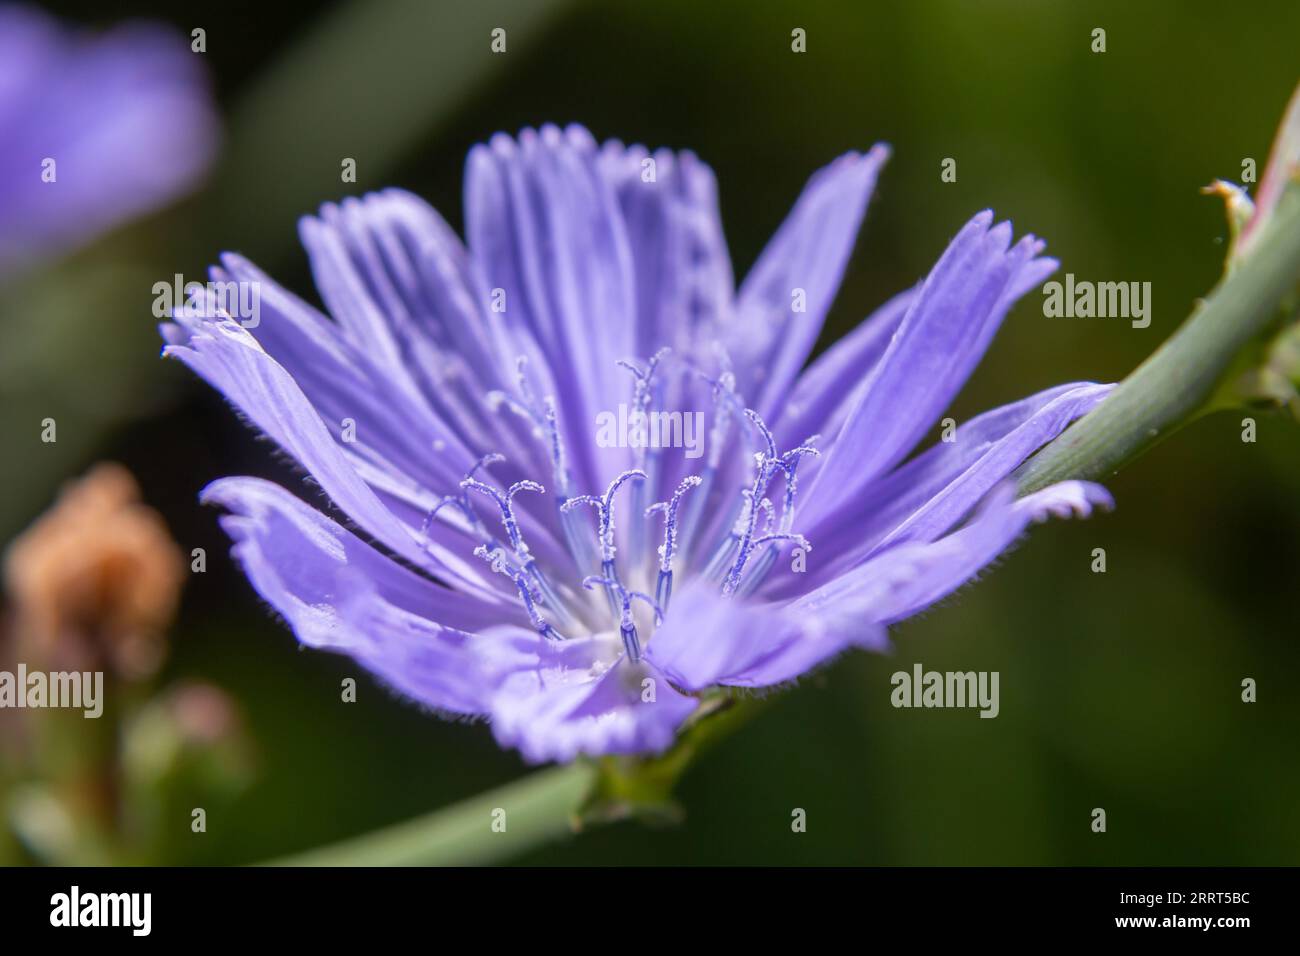 Common Chicory or Cichorium intybus flower blossoms commonly called blue sailors, chicory, coffee weed, or succory is a herbaceous perennial plant. Cl Stock Photo